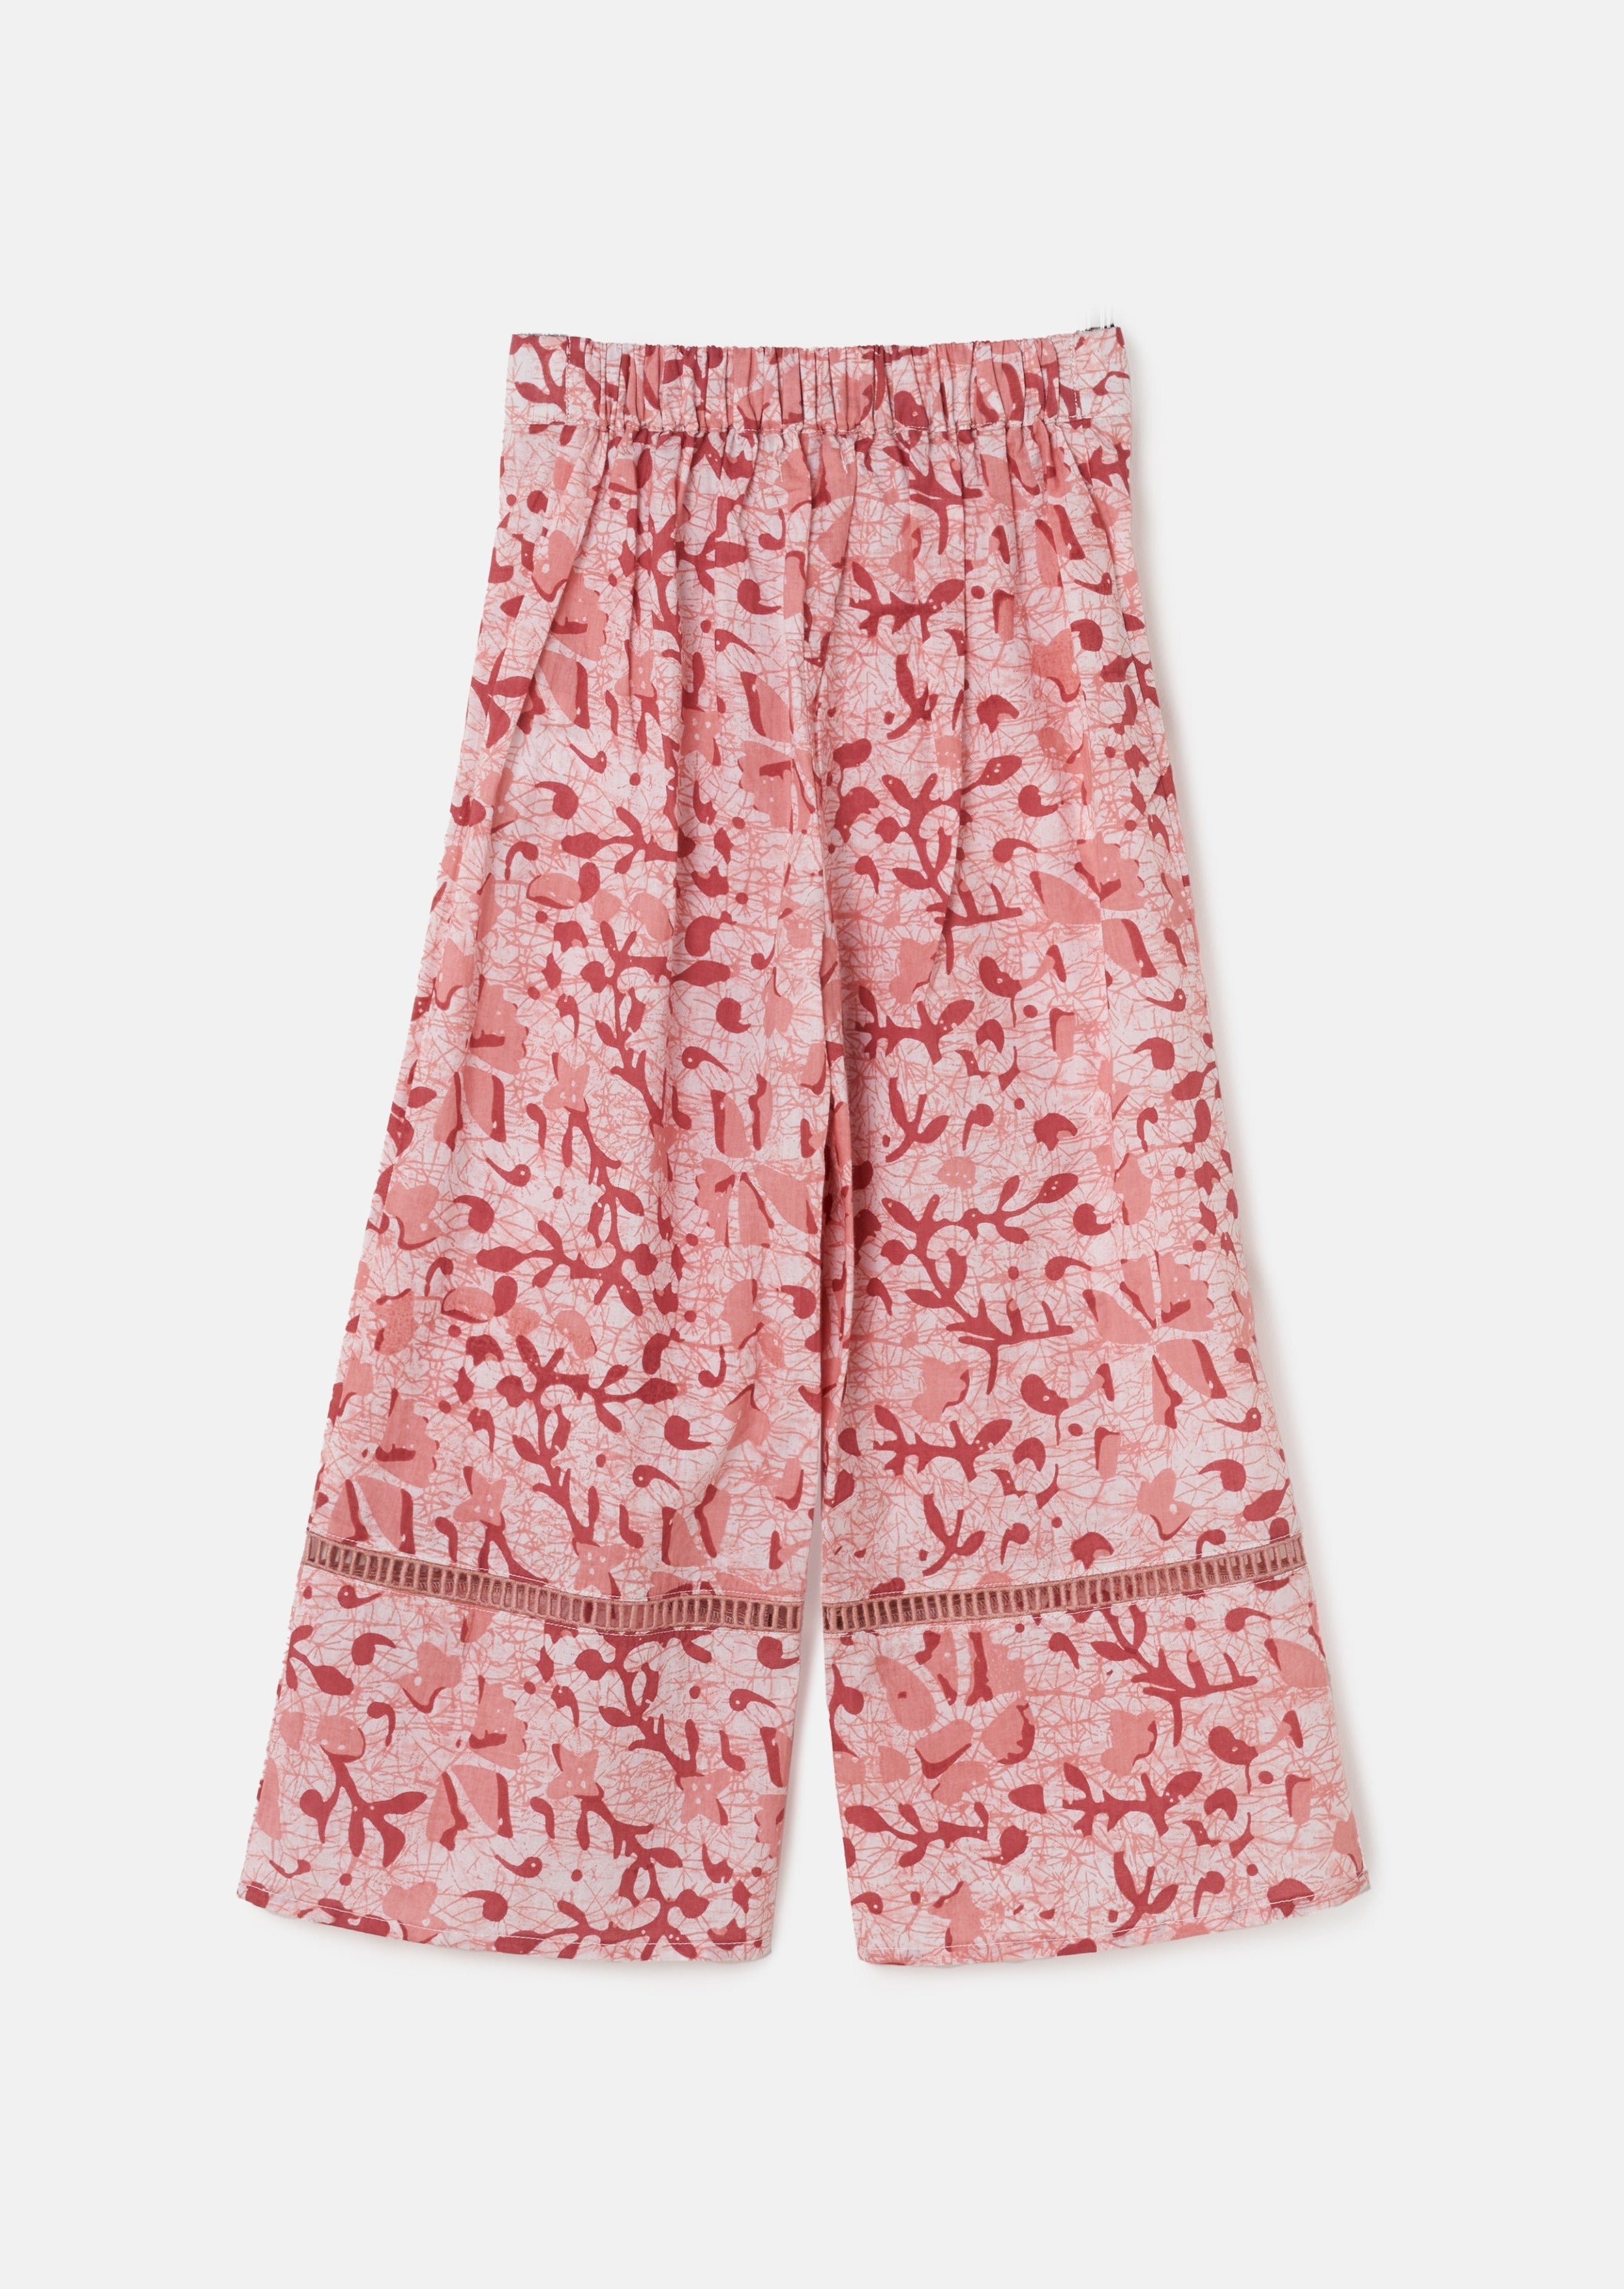 Girls Floral Printed Pink Culottes